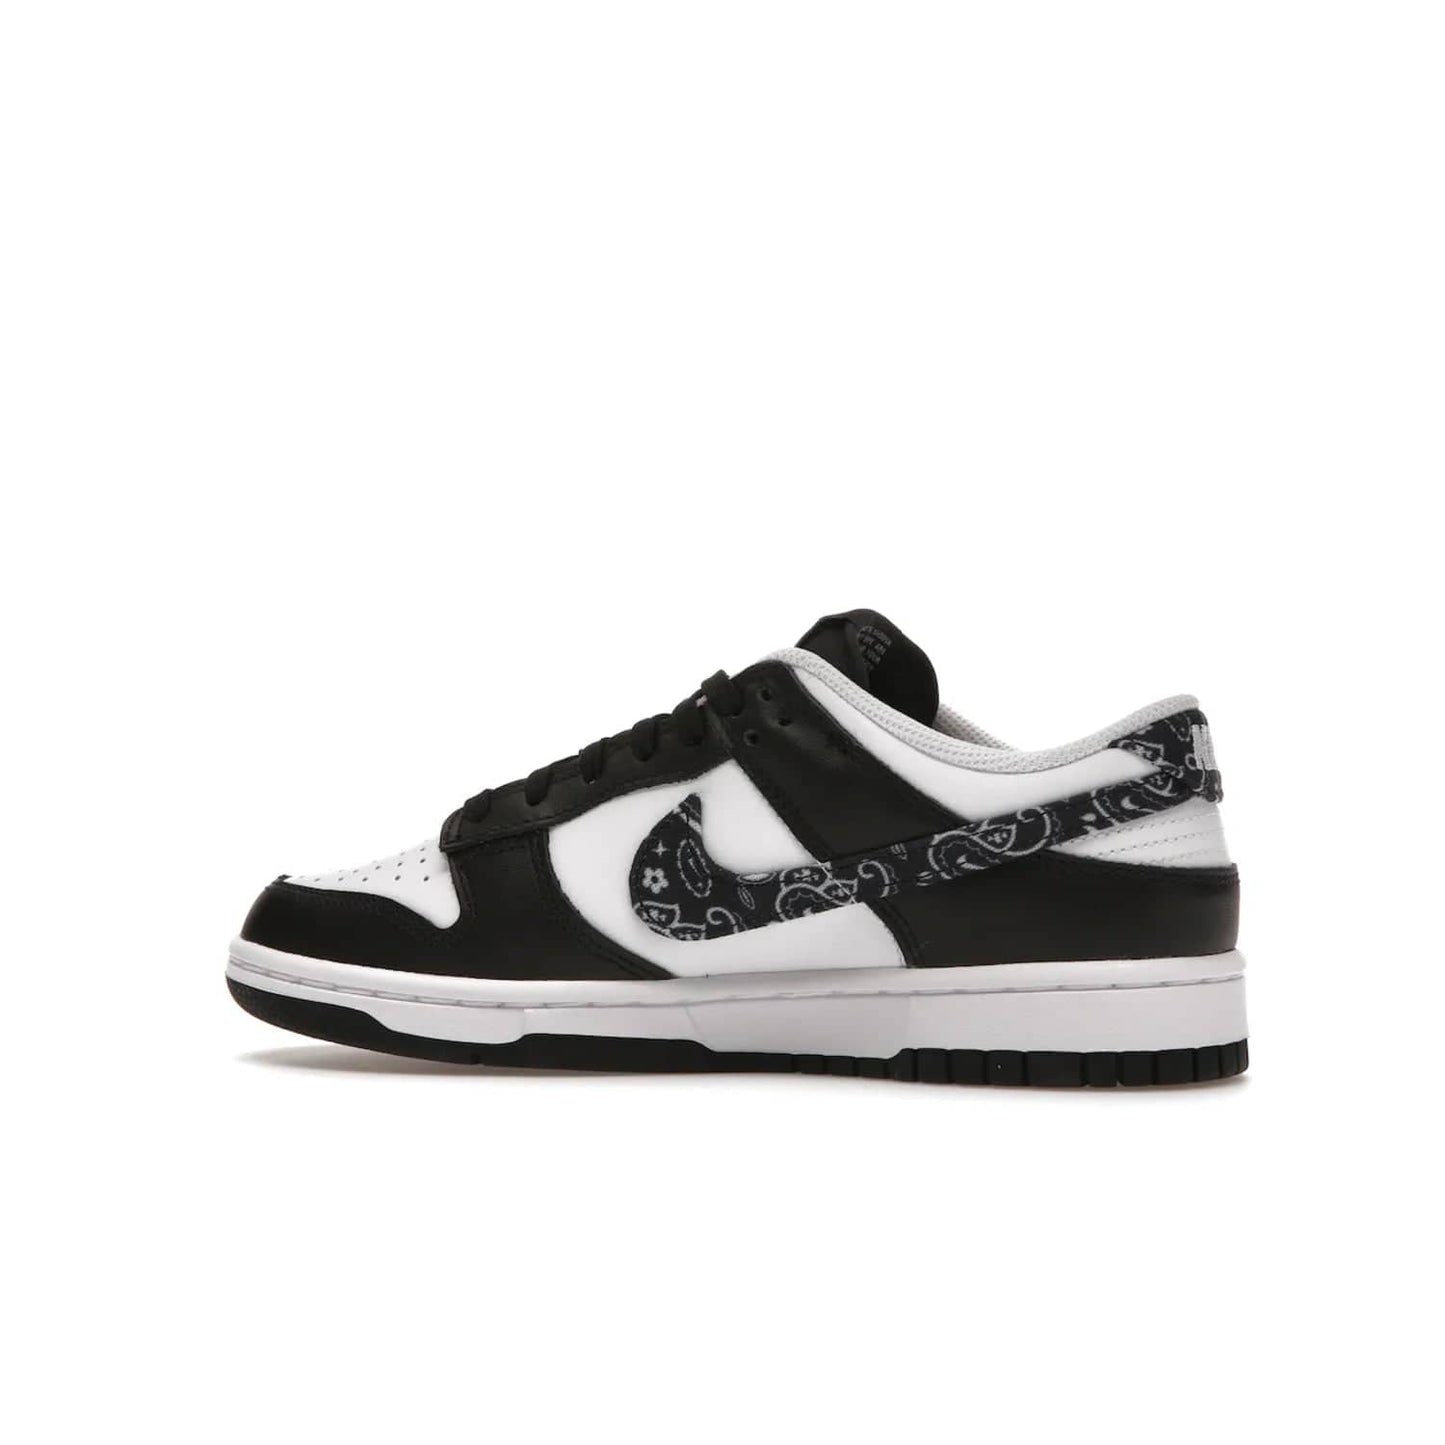 Nike Dunk Low Essential Paisley Pack Black (Women's) - Image 21 - Only at www.BallersClubKickz.com - Make a statement with the all-black Nike Dunk Low Essential Paisley Pack Black (Women's) featuring white leather overlays, a stunning paisley bandana print, and a white midsole for comfort and optimal grip on any surface.